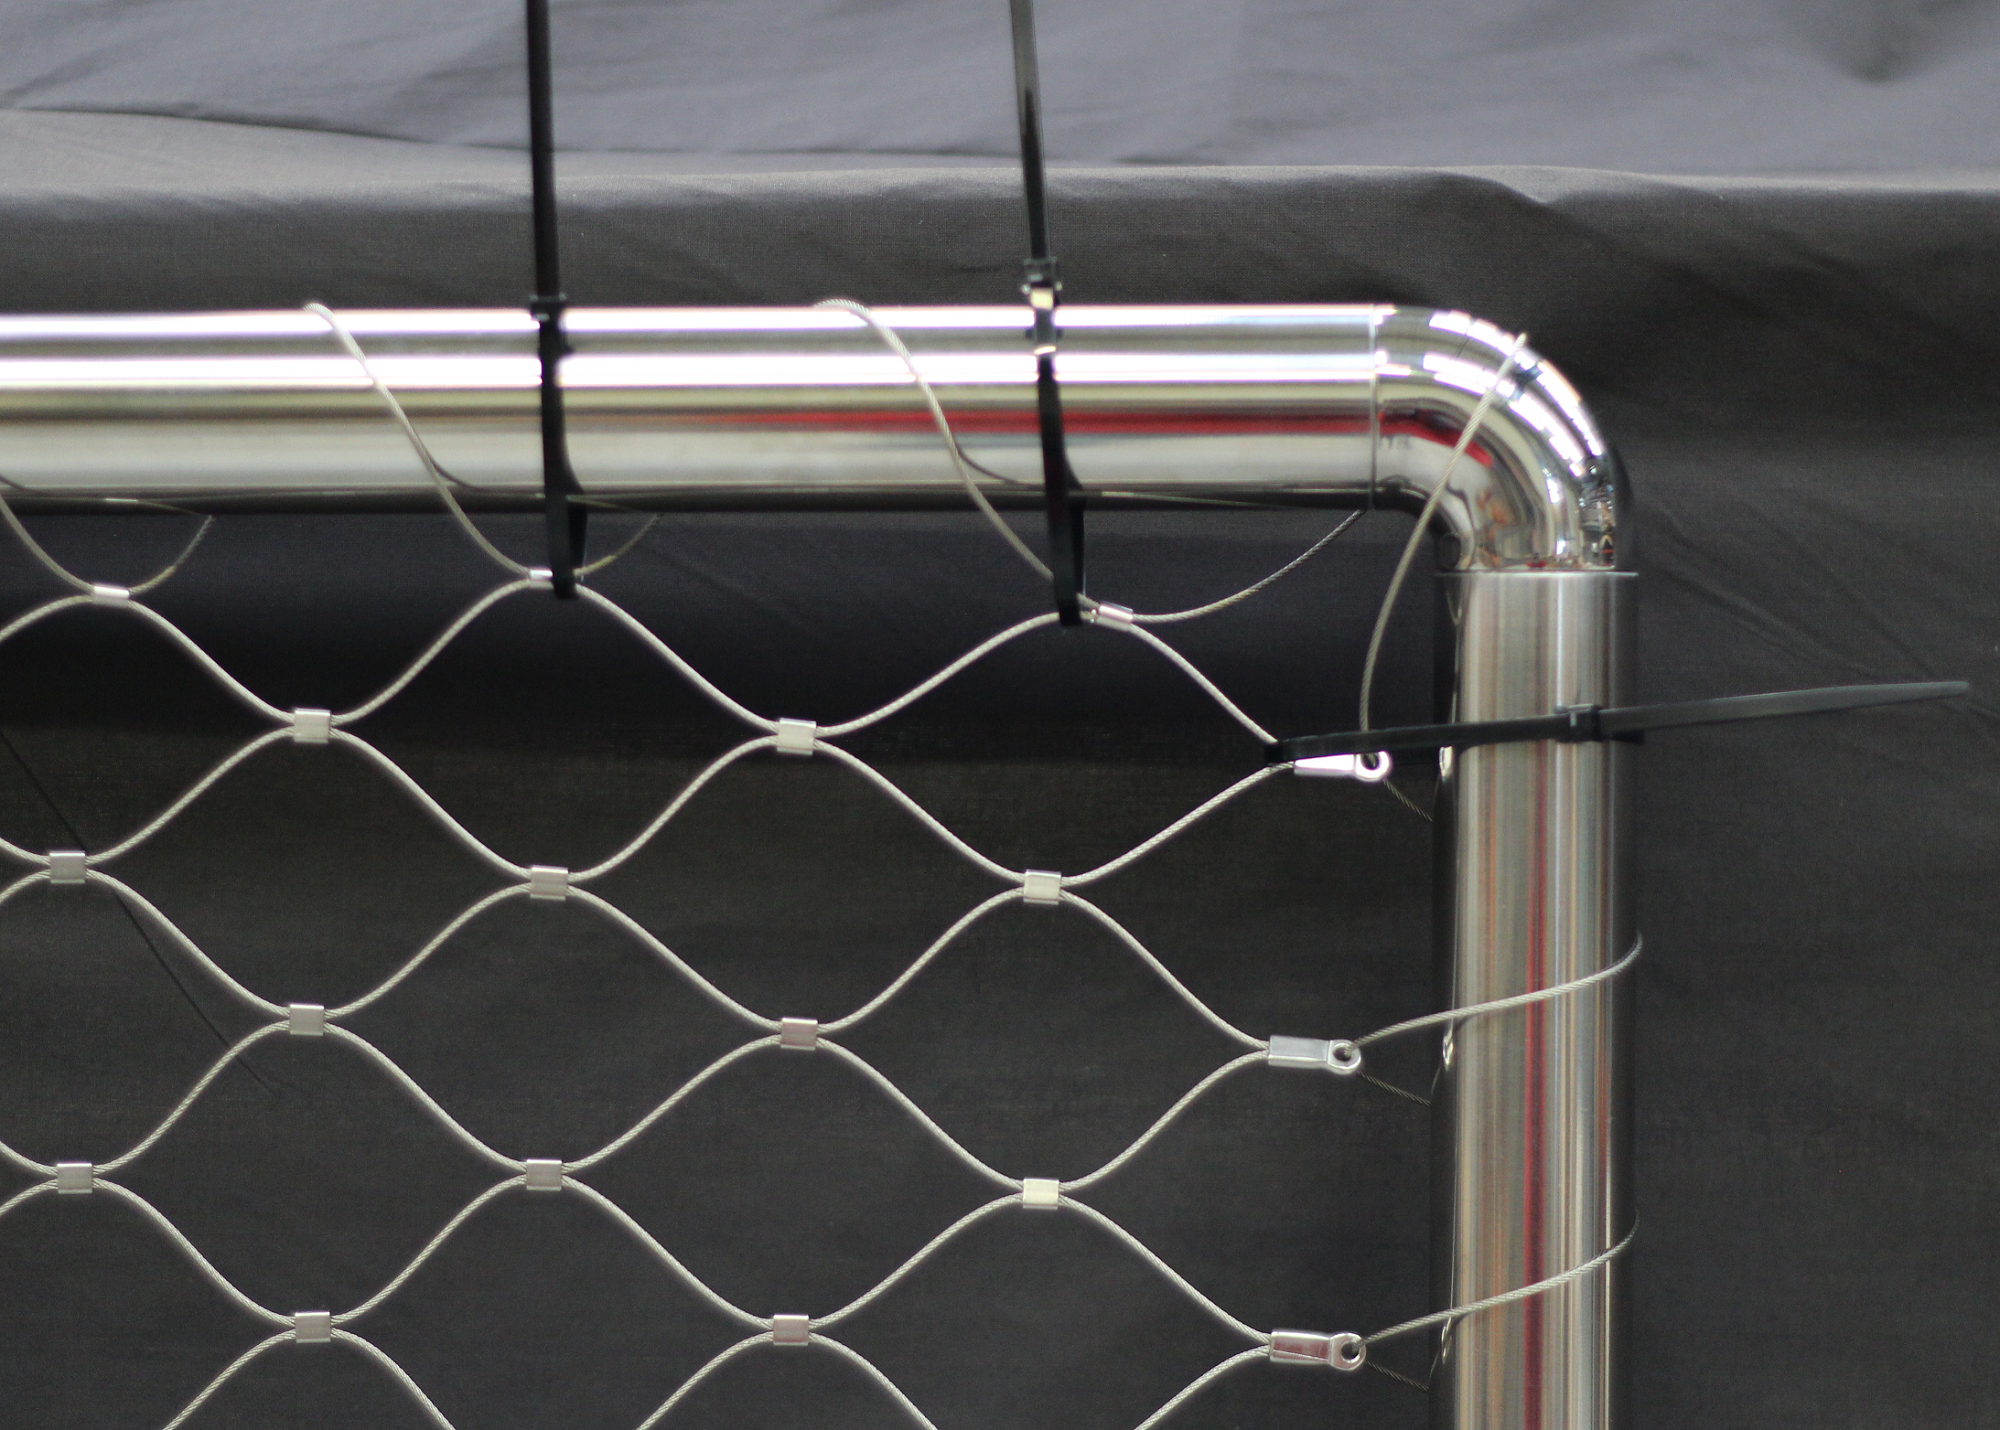 FITTING THE STAINLESS STEEL NETTING